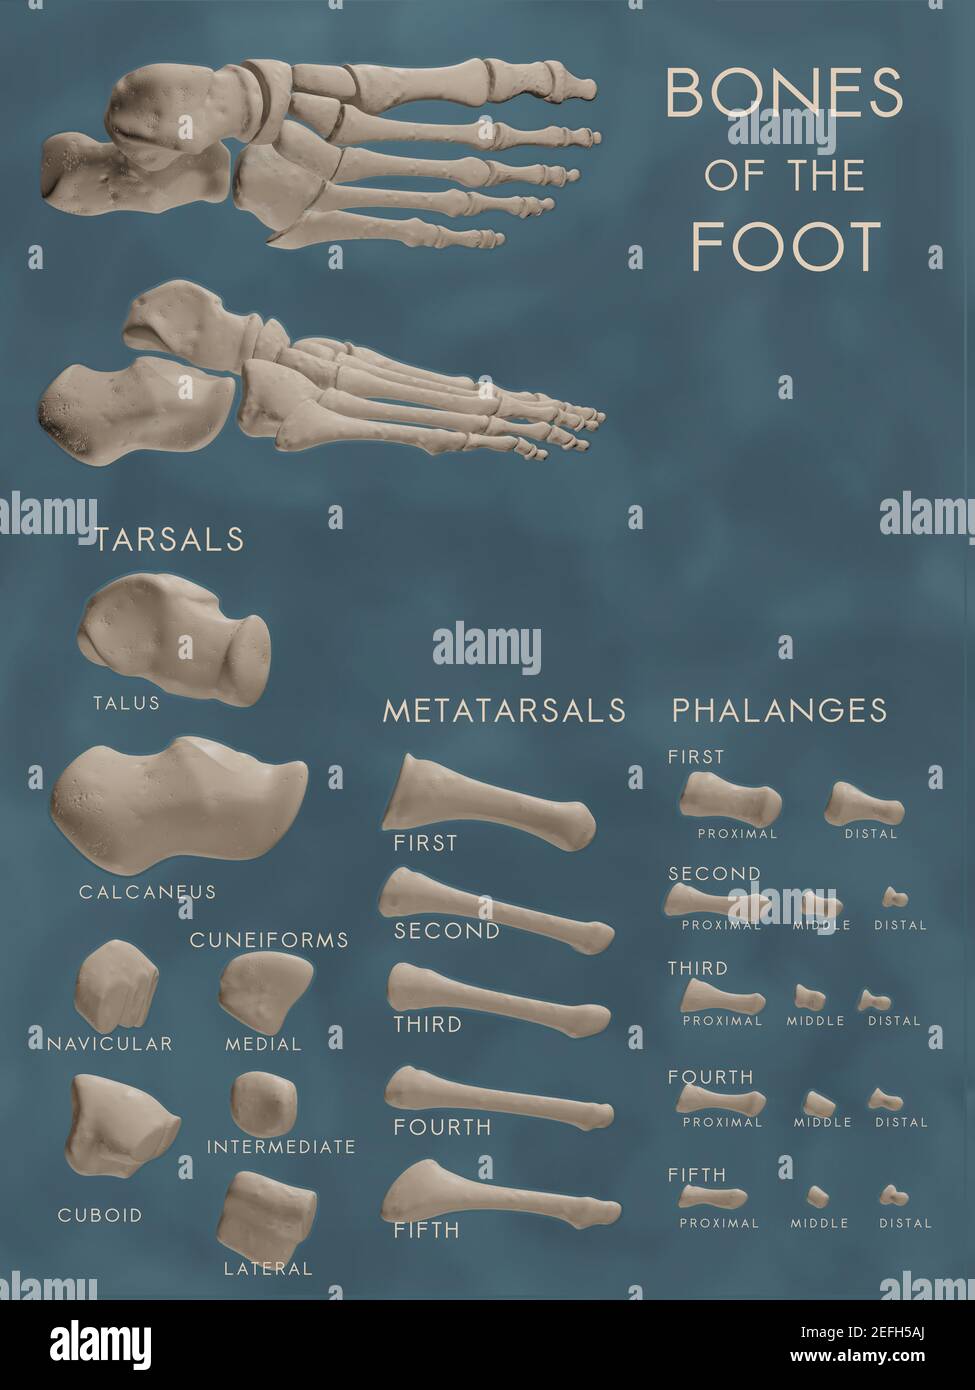 Classroom-ready poster showing bones of the foot in anatomical and exploded views. Each bone is labeled with scientific name and organised by category. Stock Photo